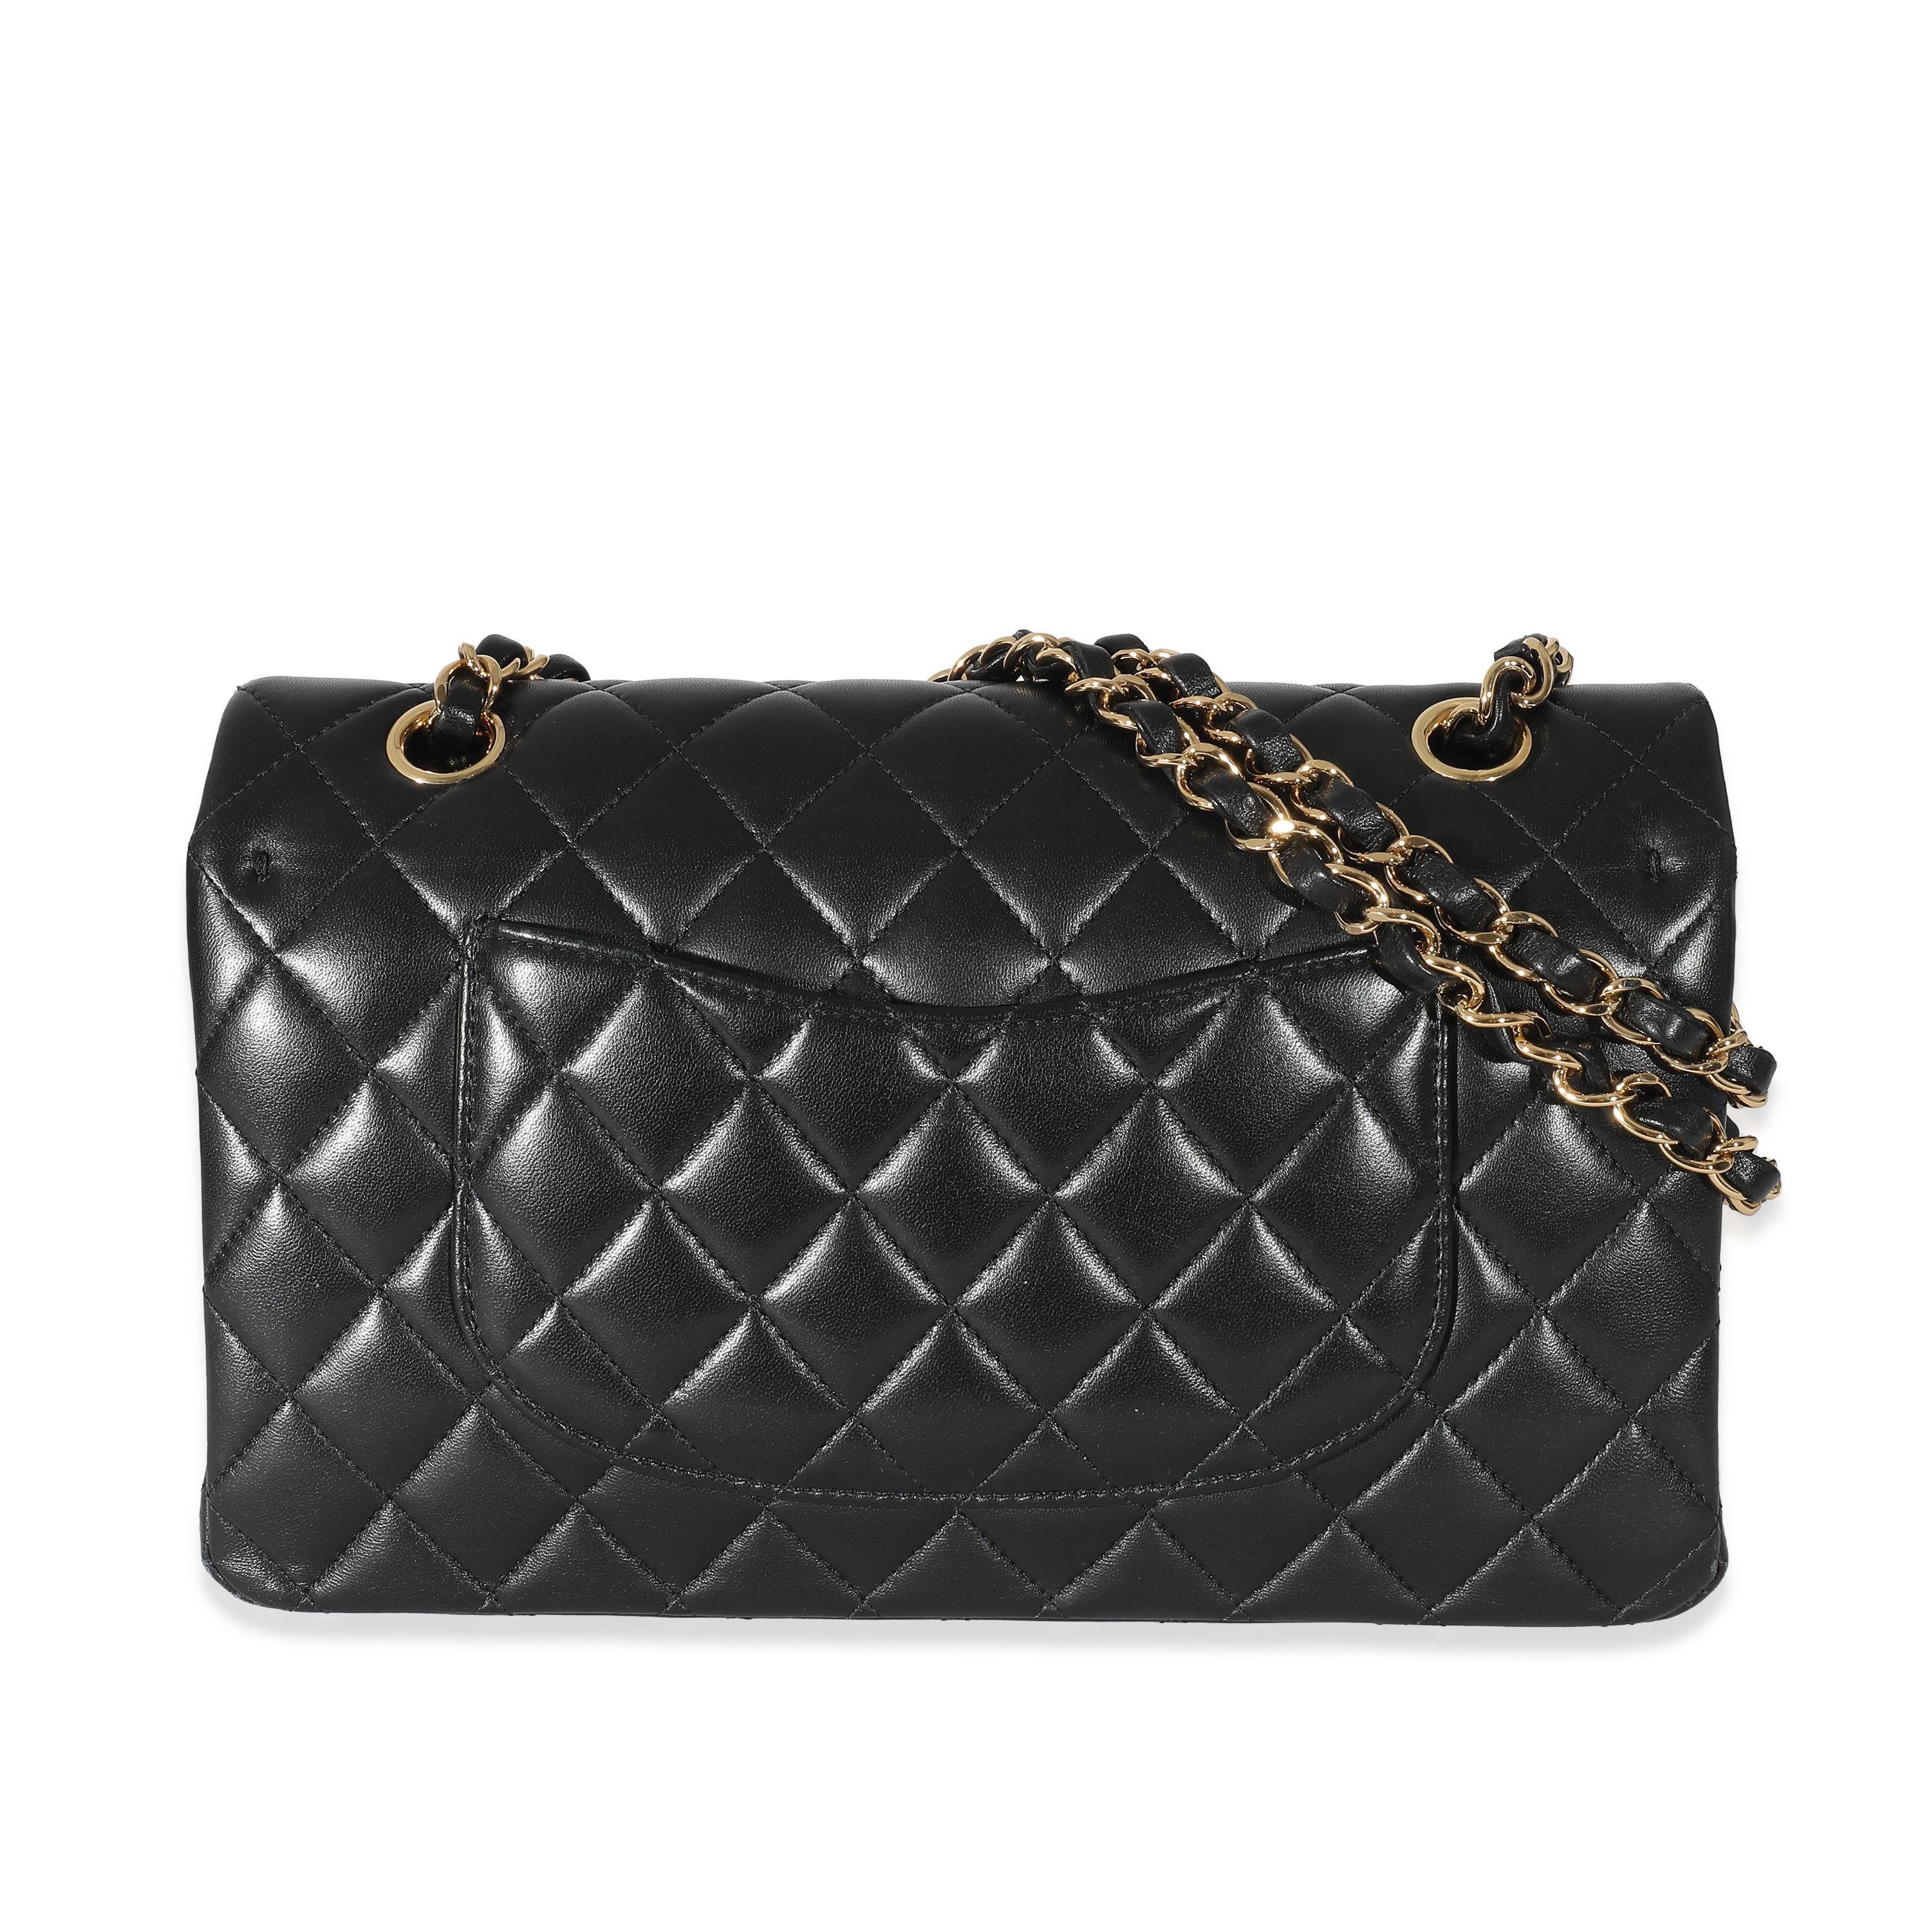 Listing Title: Chanel Black Quilted Lambskin Medium Classic Double Flap Bag
SKU: 134176
MSRP: 10200.00 USD
Condition: Pre-owned 
Condition Description: A timeless classic that never goes out of style, the flap bag from Chanel dates back to 1955 and